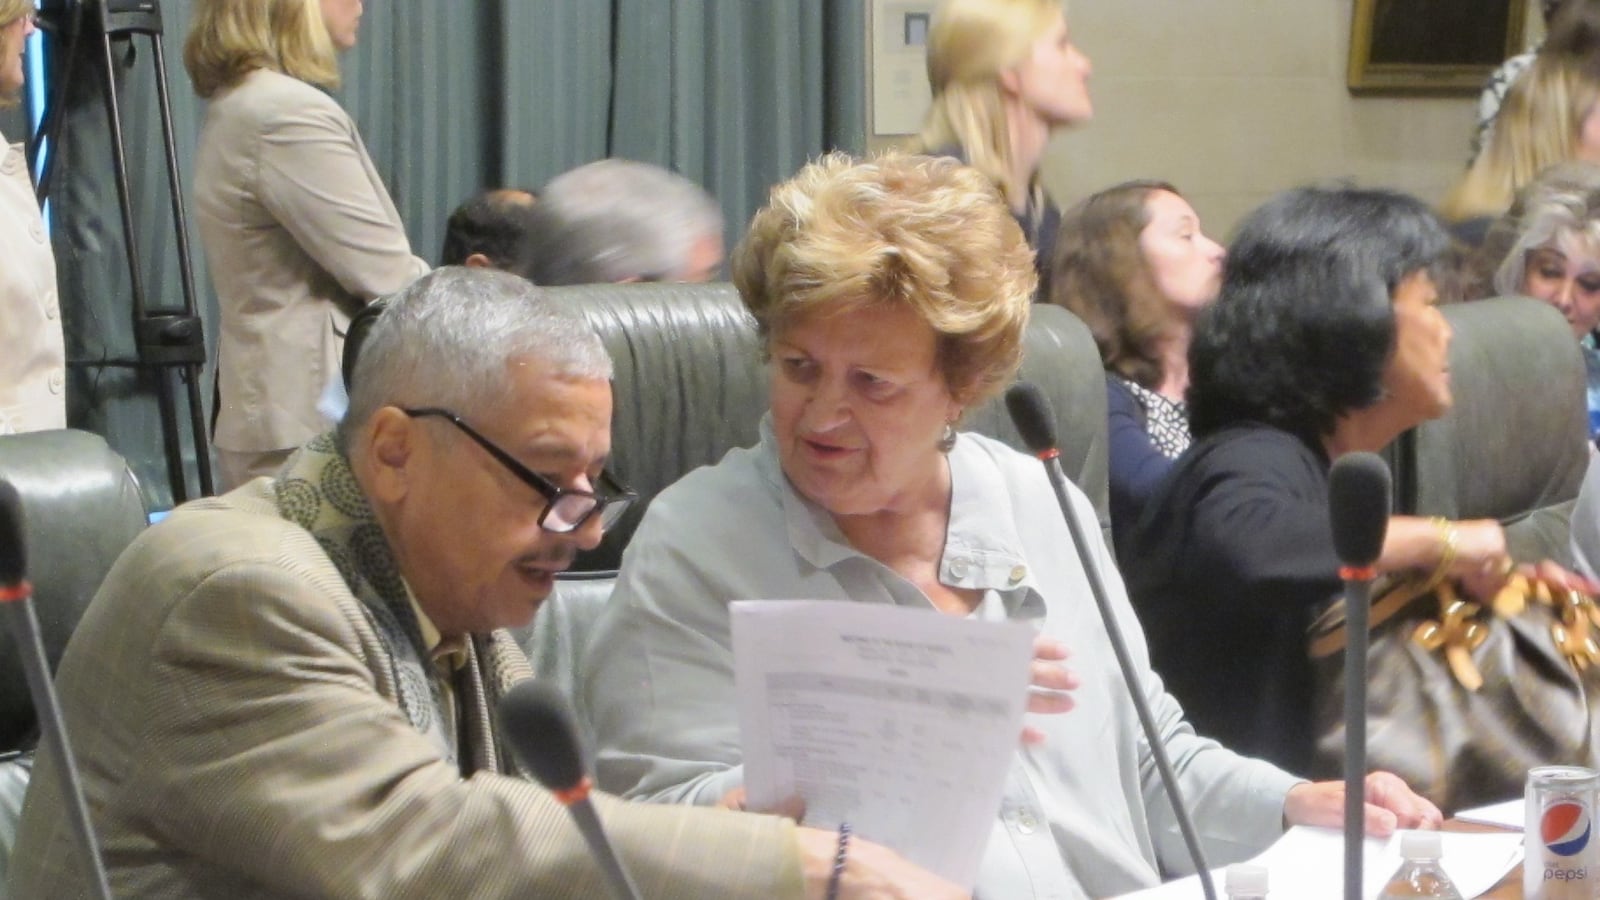 Regents Luis Reyes and Beverly Ouderkirk go over some paperwork at July’s Board of Regents meeting.